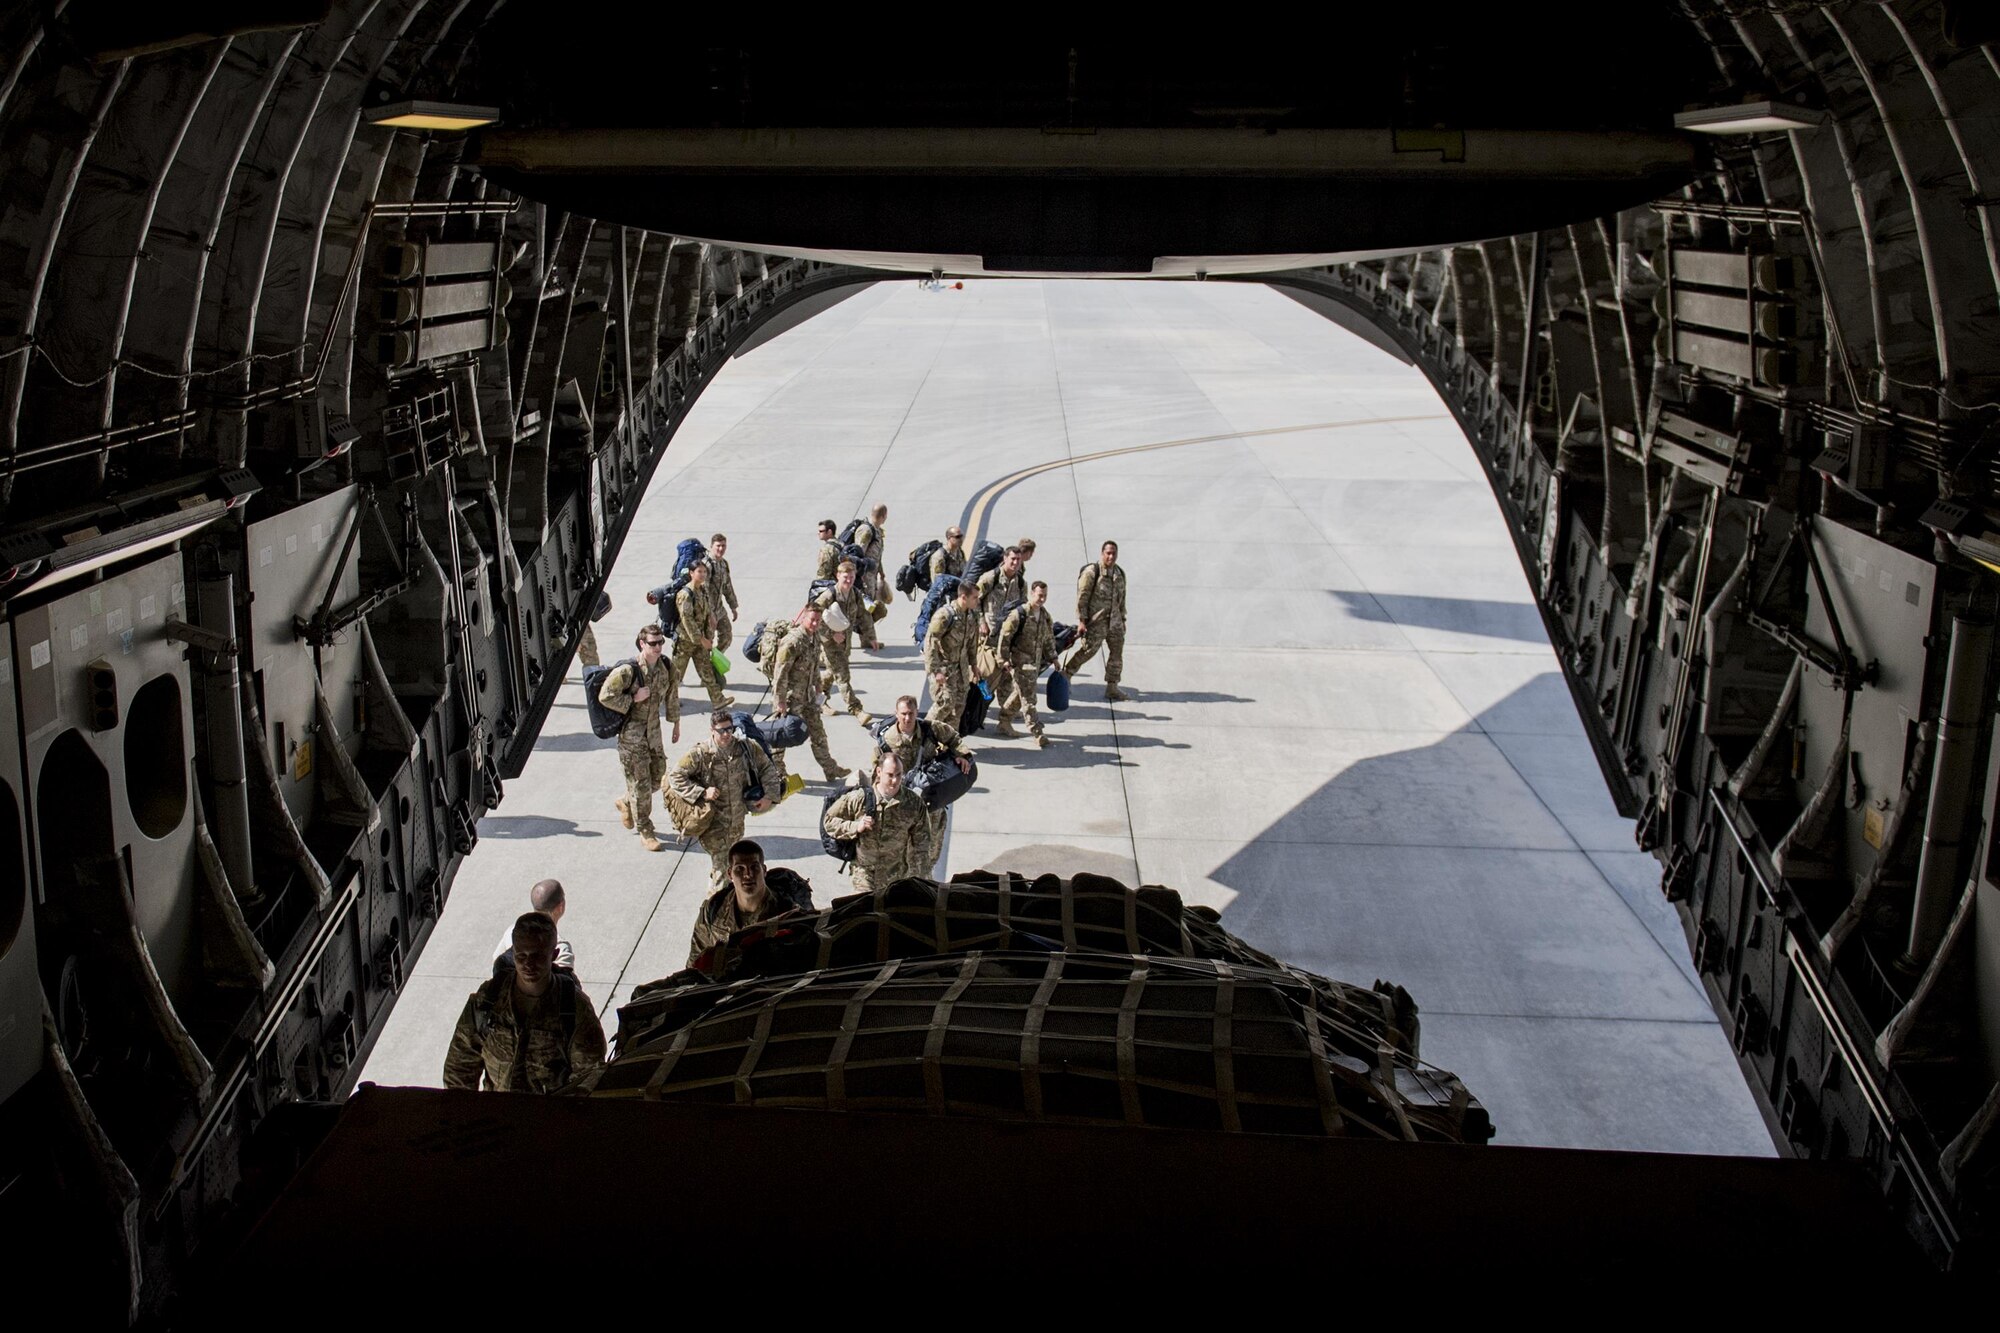 U.S. Air Force Airmen assigned to the 38th and 41st Rescue Squadrons board a C-17 Globemaster III before deploying to Southeast Europe, Sept. 26, 2016, at Moody Air Force Base, Ga. These Airmen are experts in personnel recovery, treatment and extraction in an array of environments. (U.S. Air Force photo by Airman 1st Class Daniel Snider)